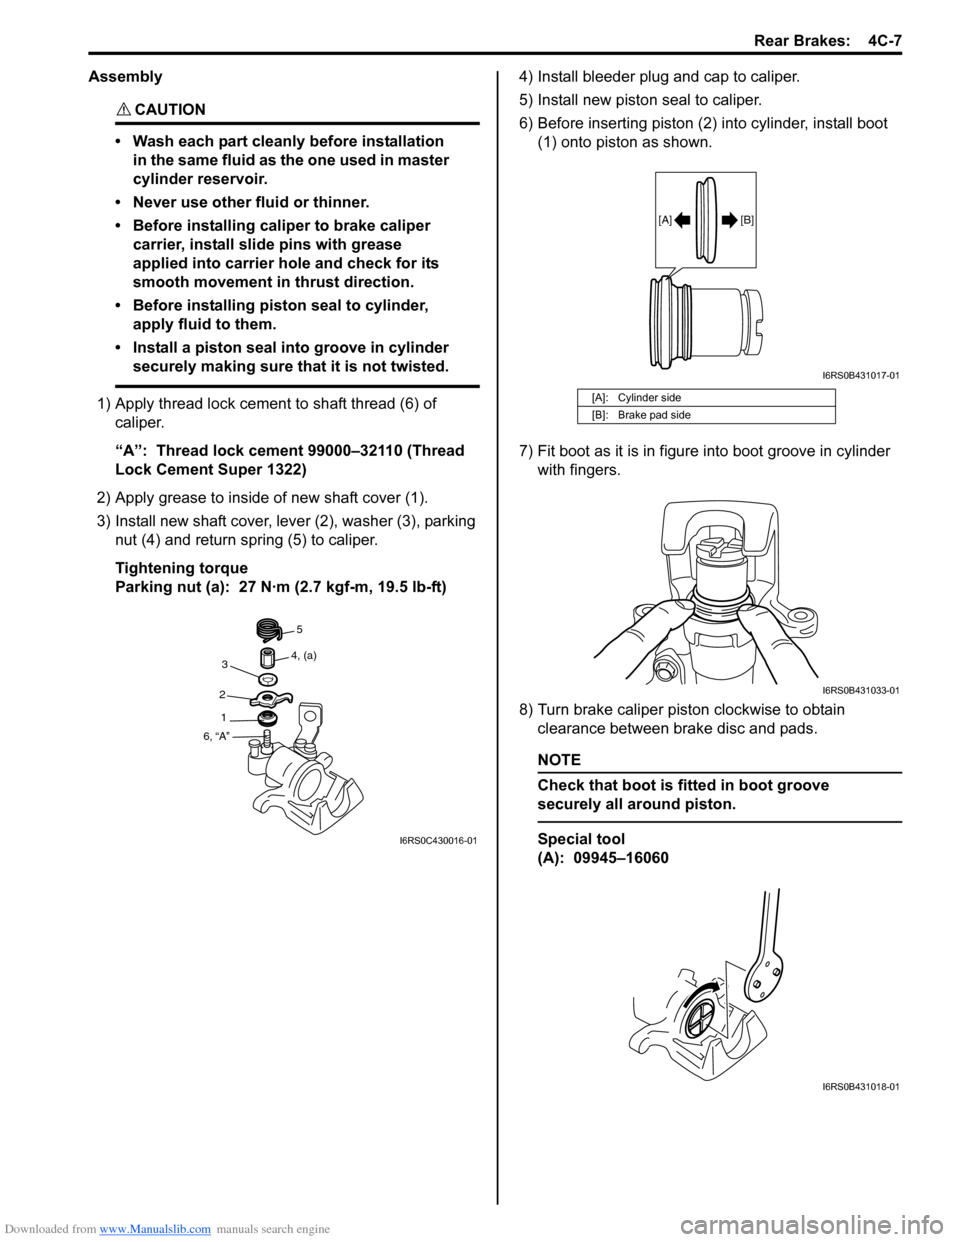 SUZUKI SWIFT 2006 2.G Service Service Manual Downloaded from www.Manualslib.com manuals search engine Rear Brakes:  4C-7
Assembly
CAUTION! 
• Wash each part cleanly before installation in the same fluid as the one used in master 
cylinder rese